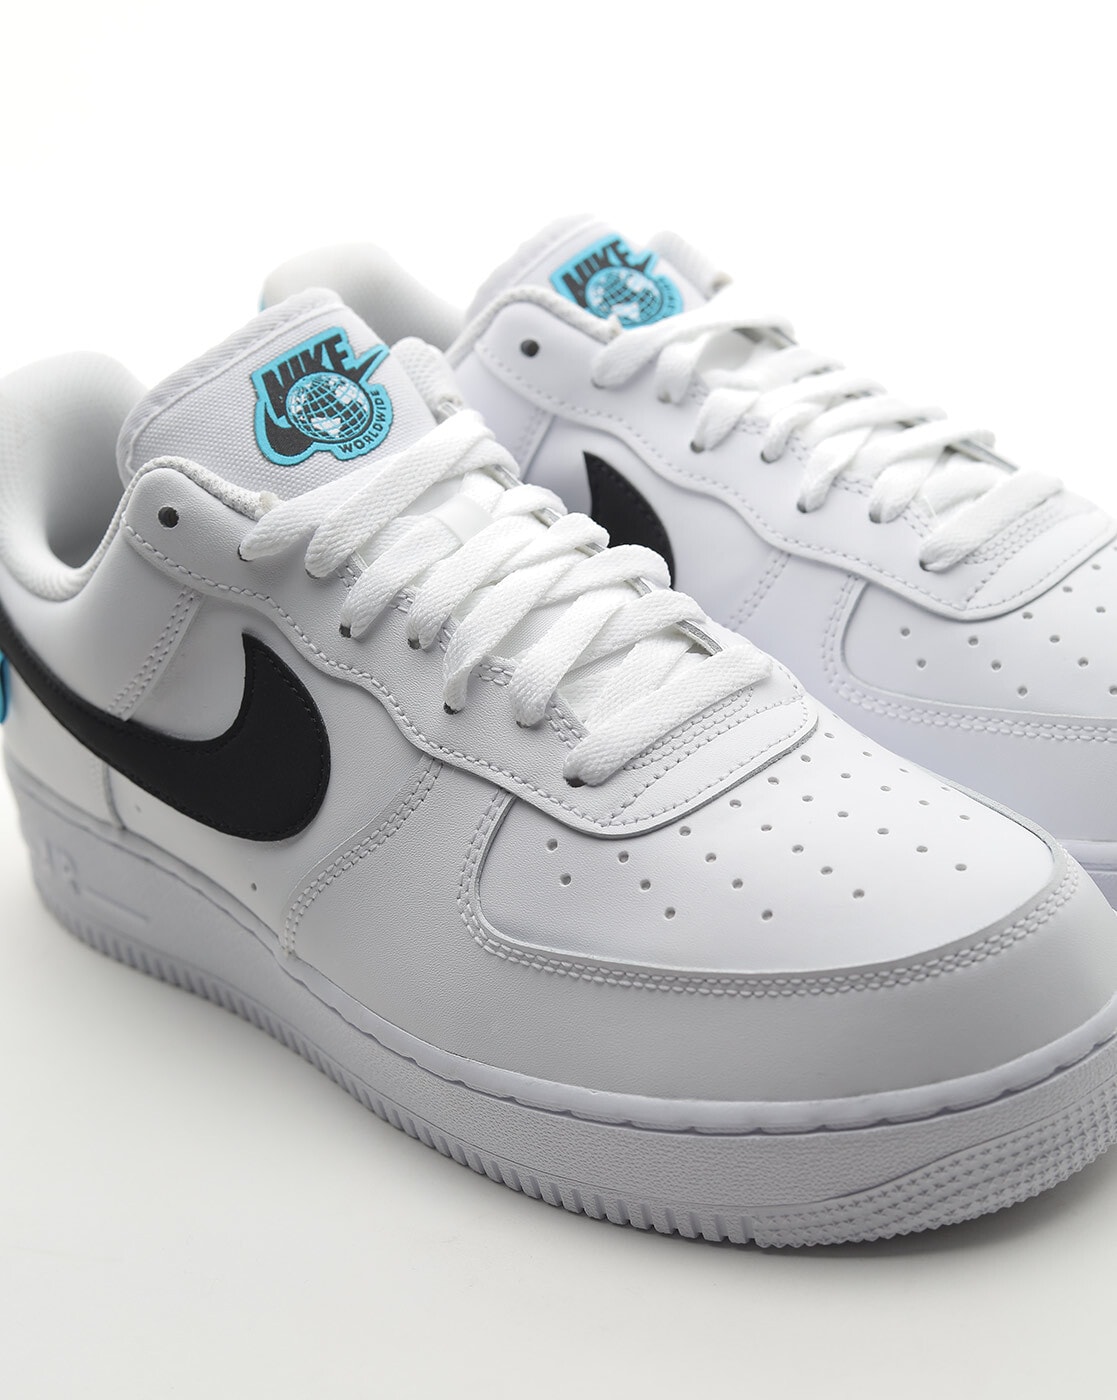 Low Top Air Force Ones.